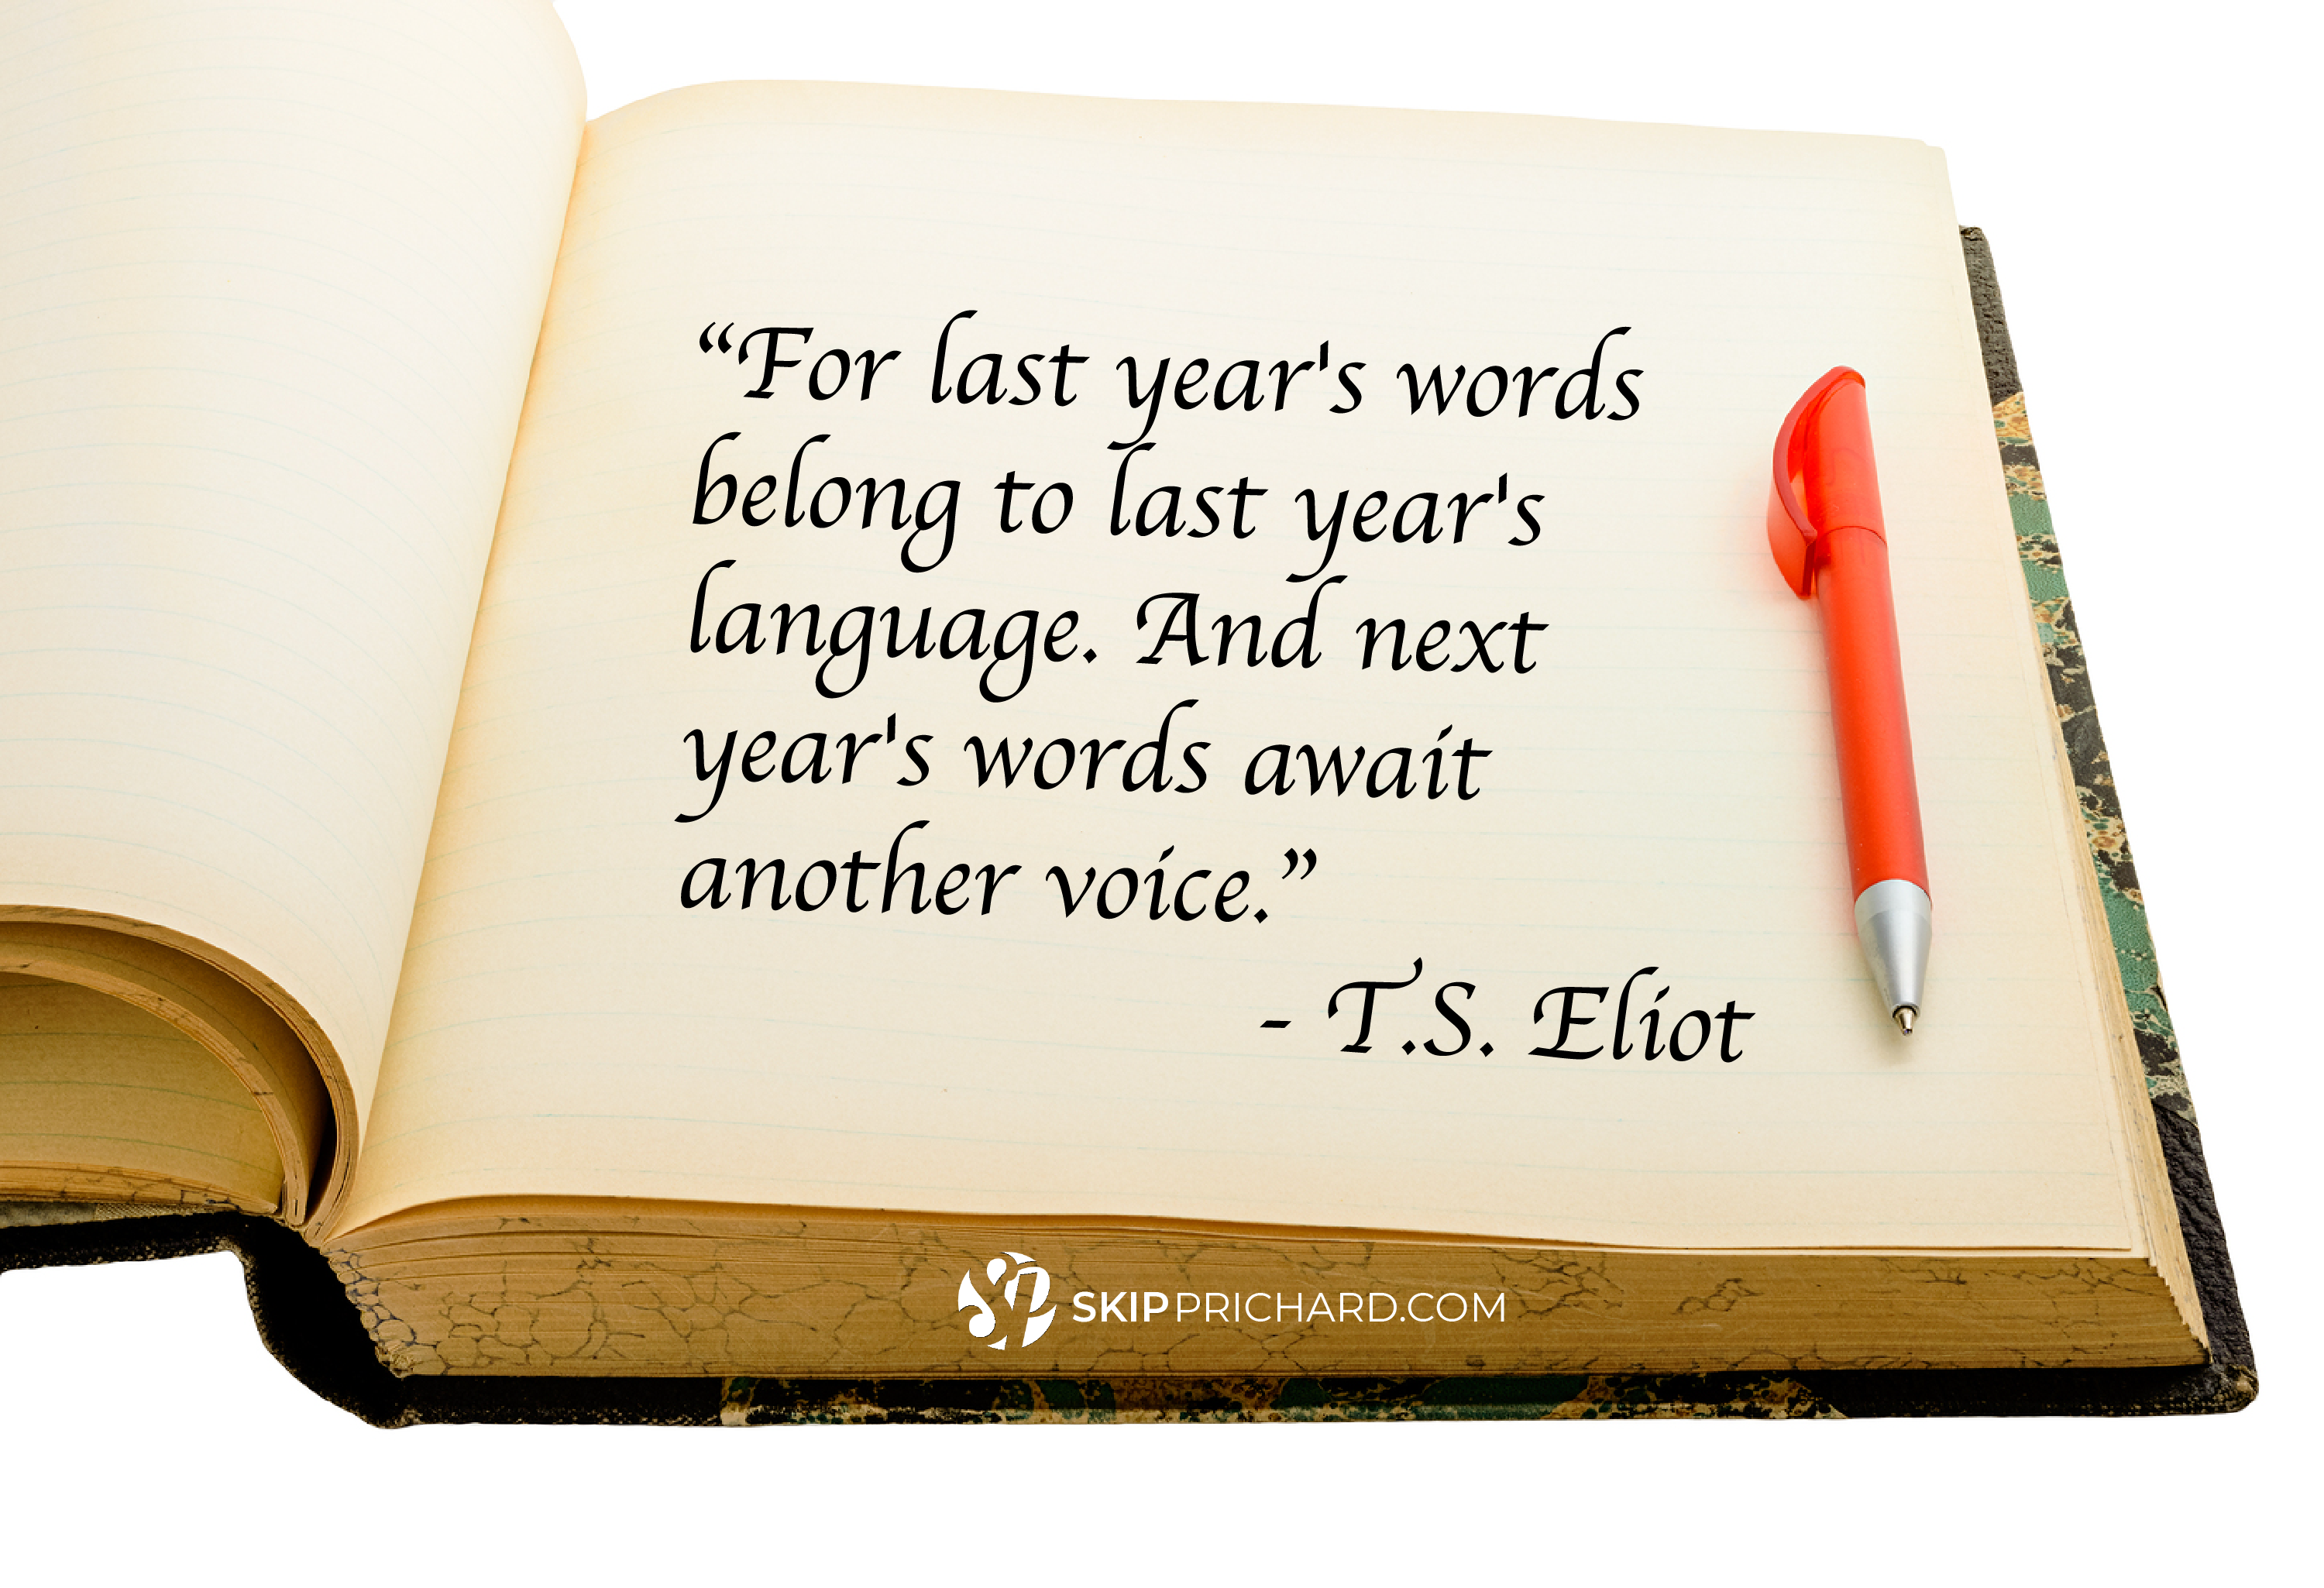 “For last year’s words belong to last year’s language. And next year’s words await another’s voice.”